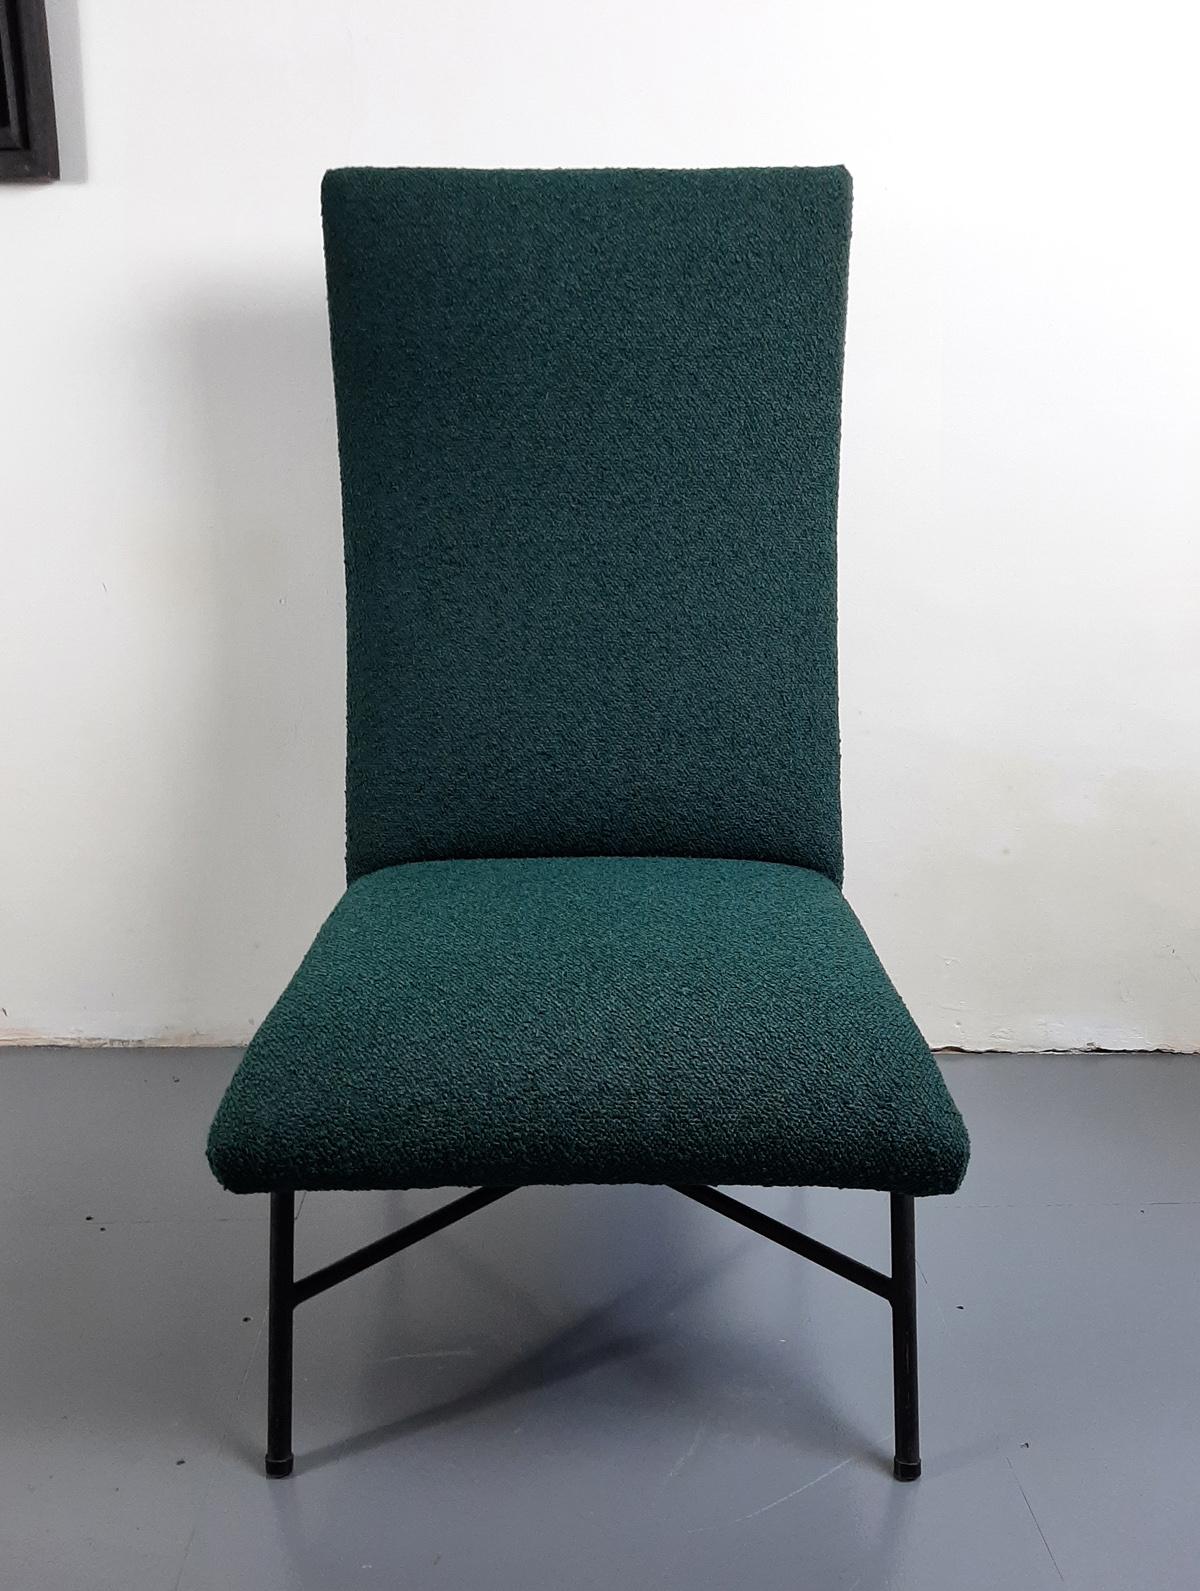 Mid-century, modernist occasional chair by Genevieve Dangles-Christian Defrance for Burov, 1950s. Iron structure, newly upholstered in a green boucle Dedar fabric.

Dimensions : H 92 x W 76 x D 51 cm.